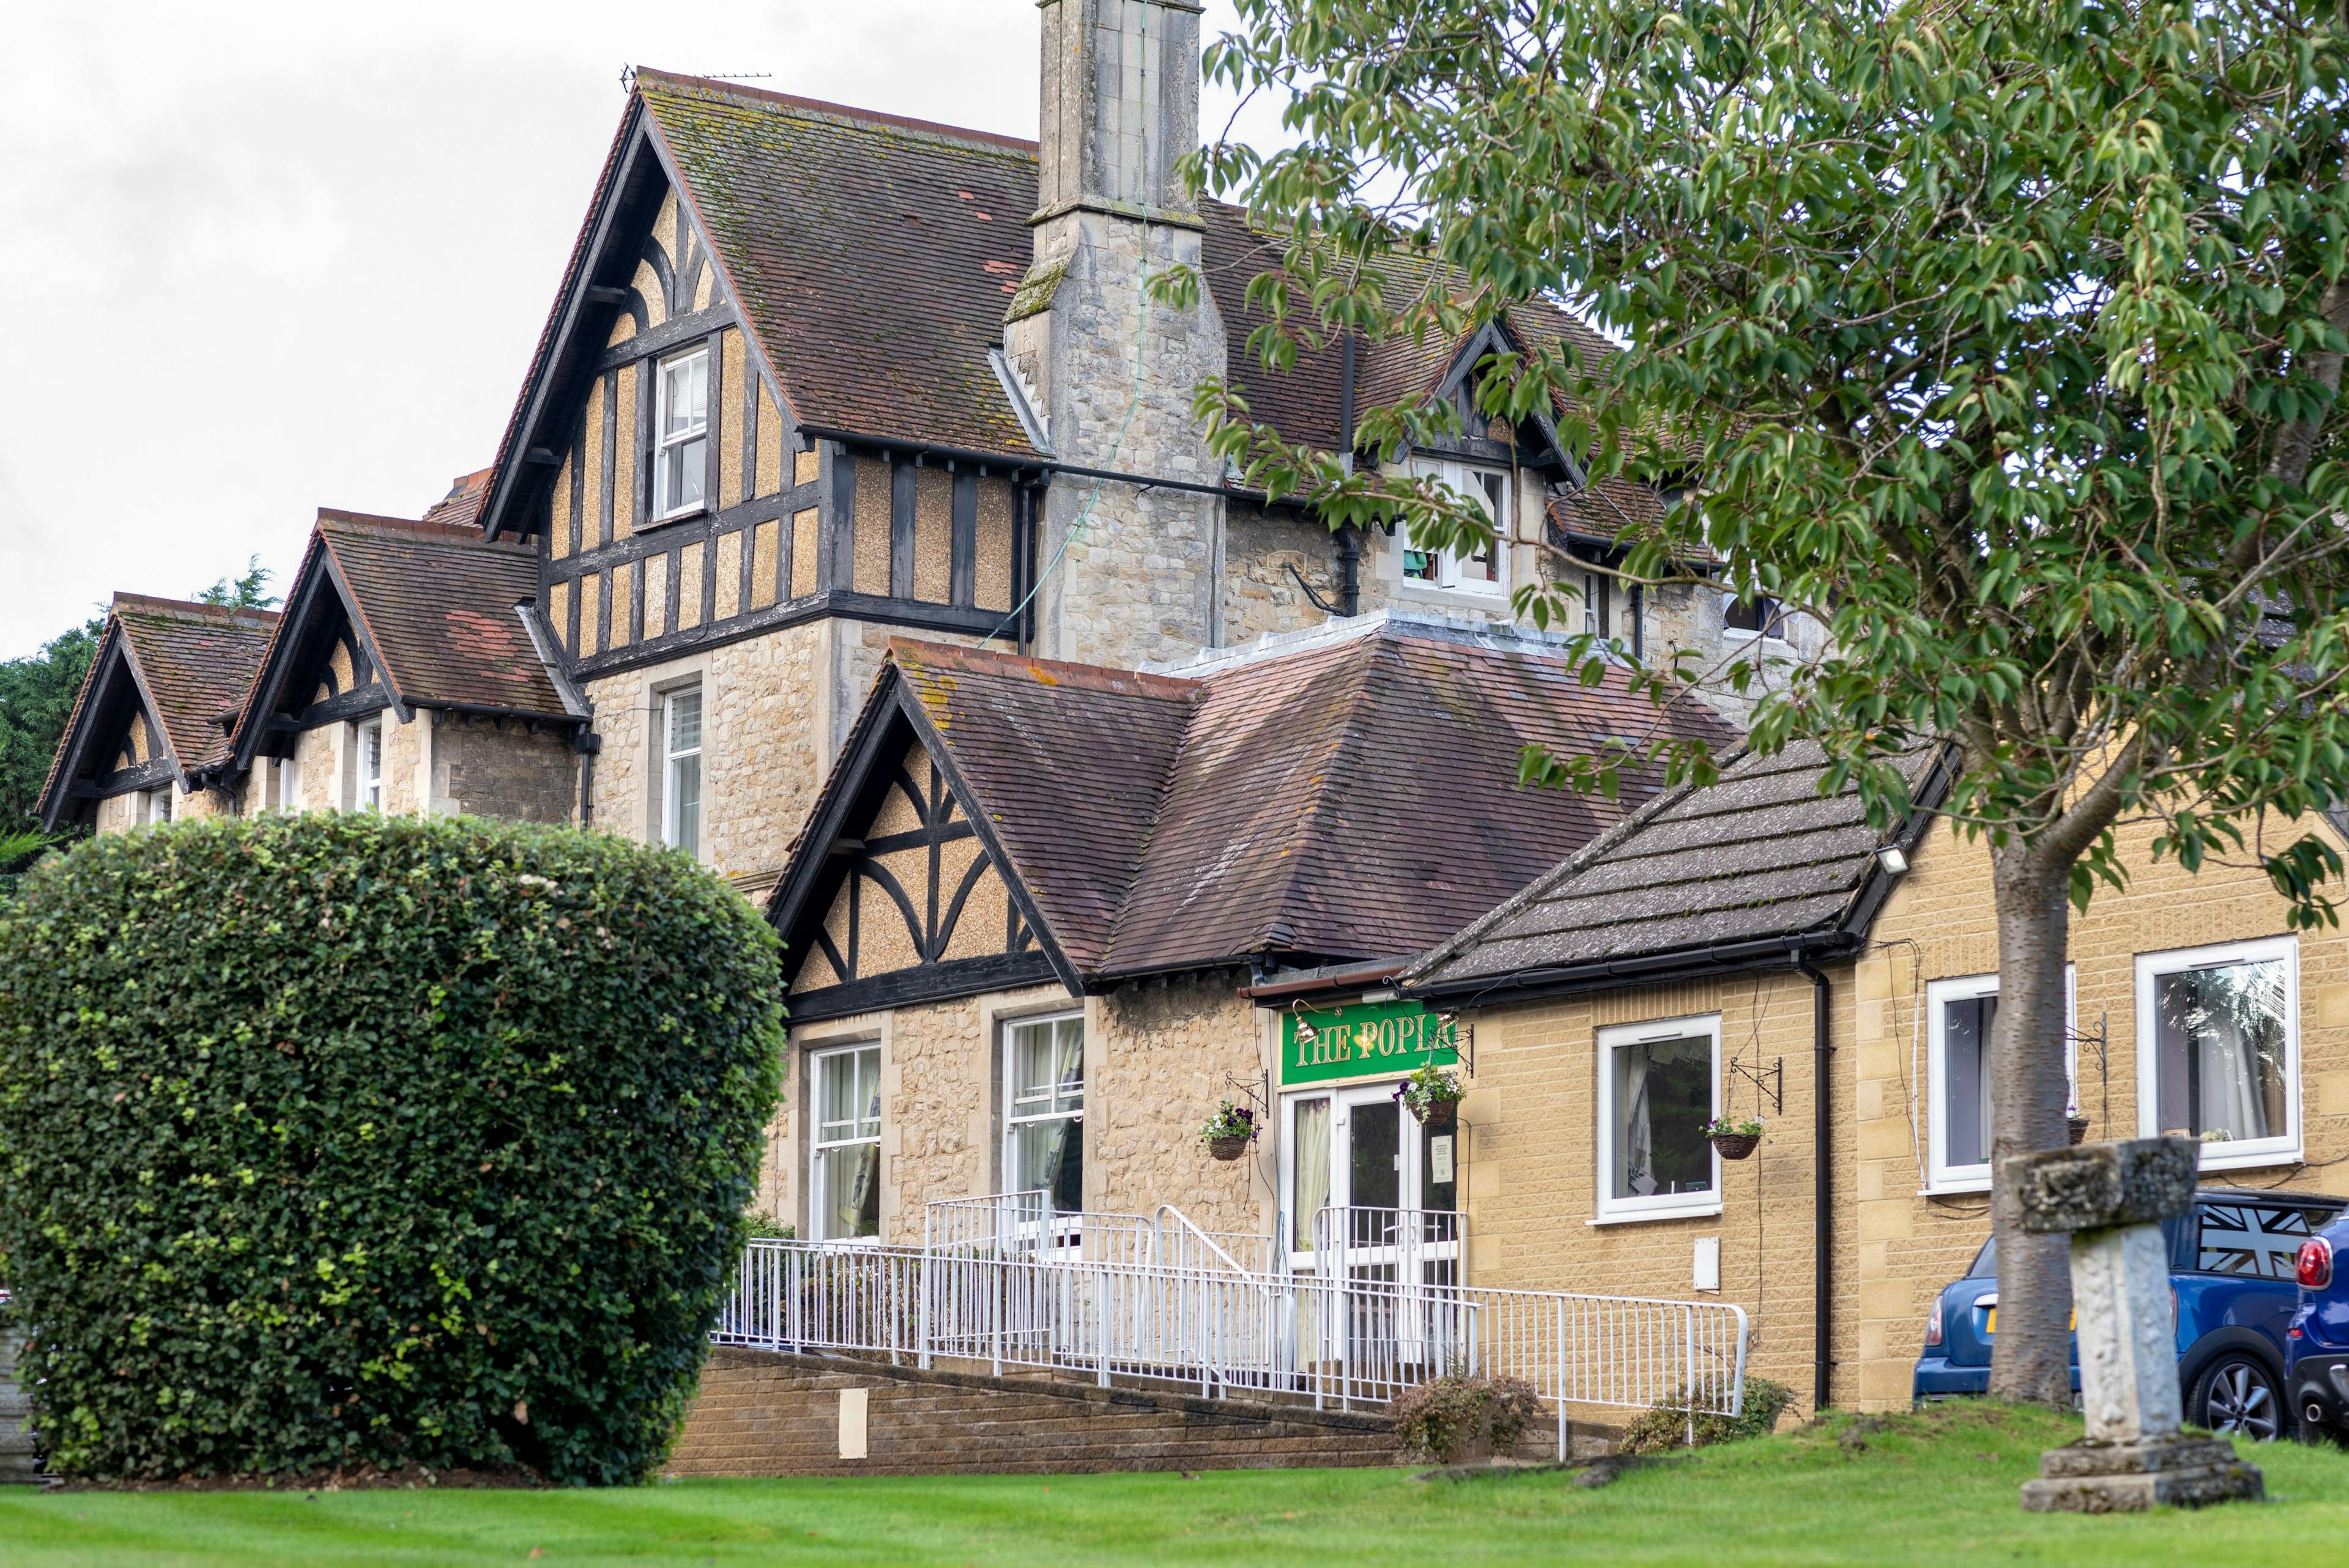 Exterior of The Poplars care home in Maidstone, Kent